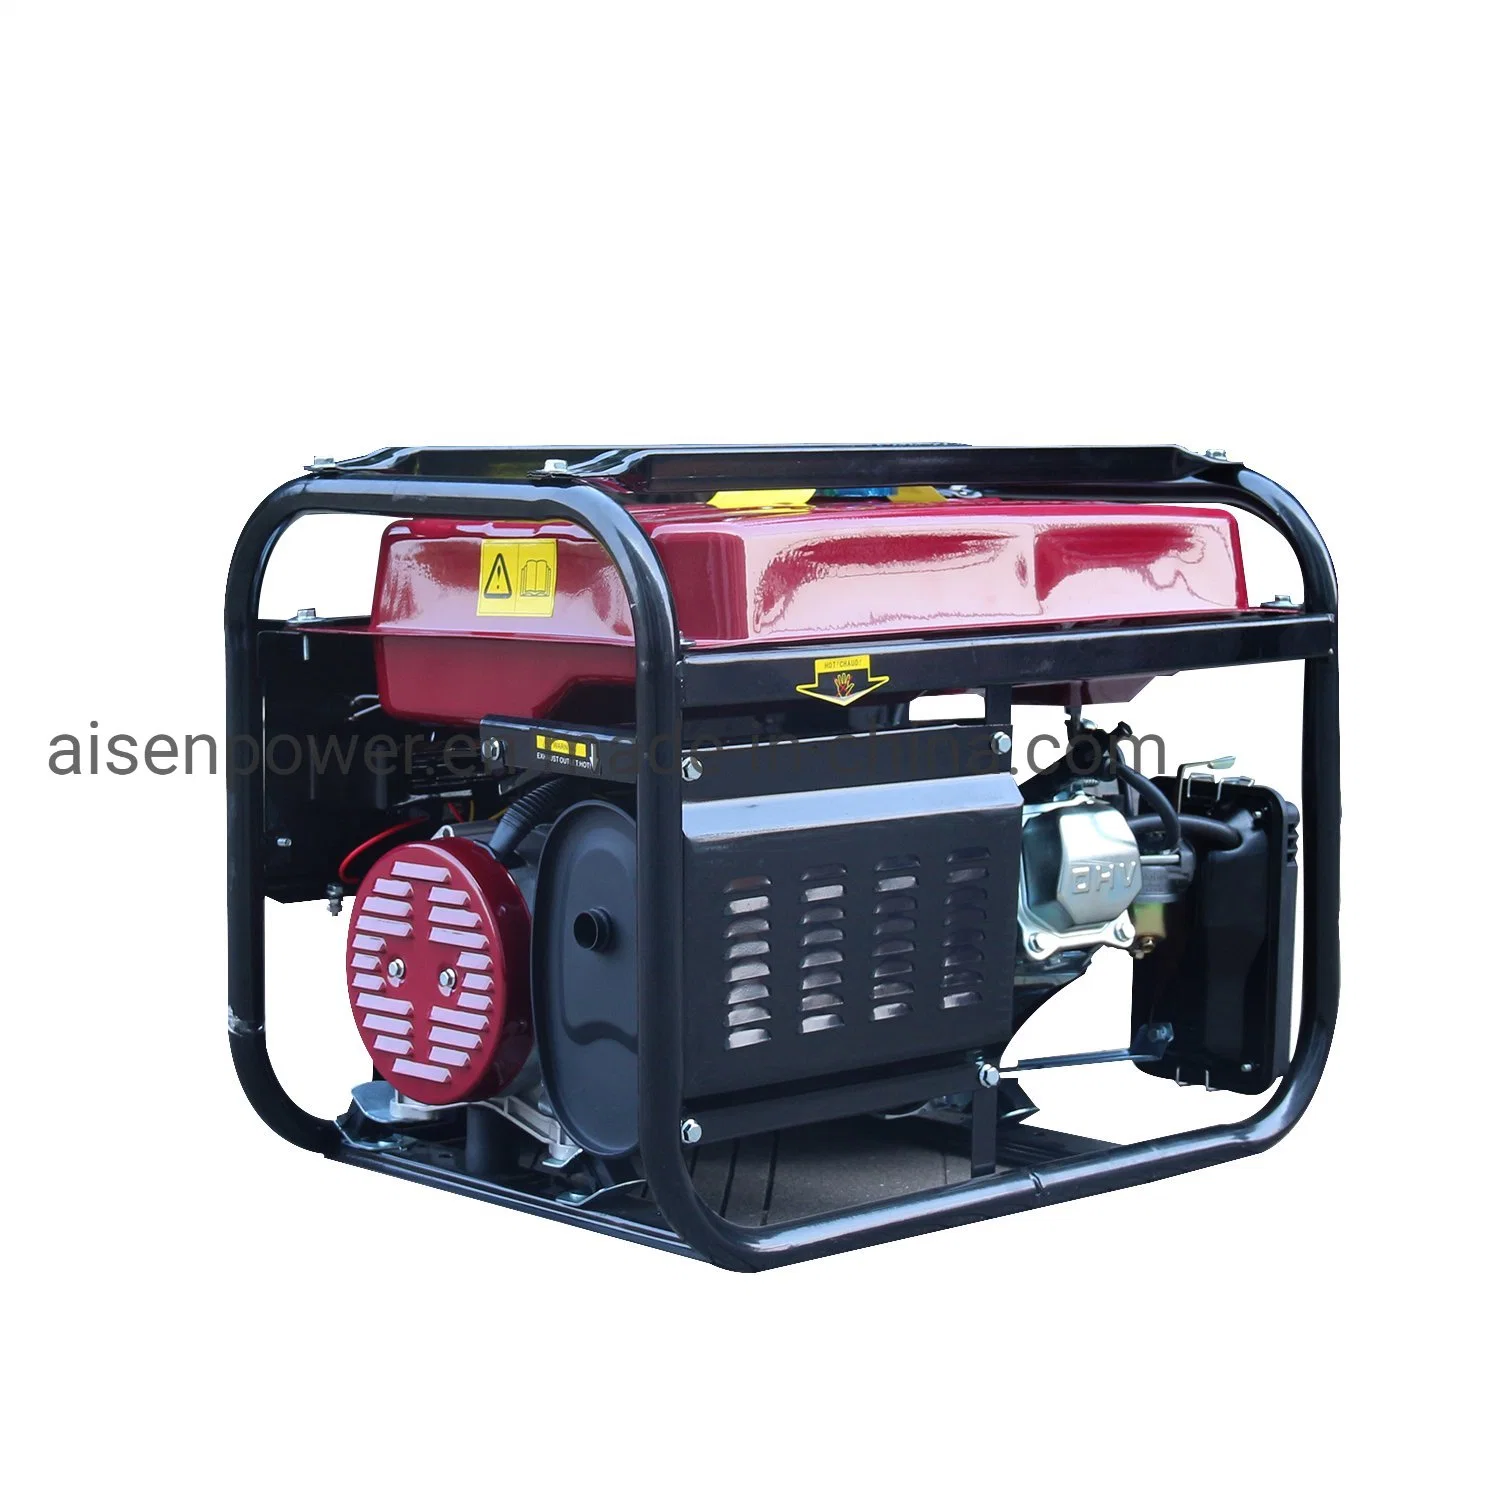 Aisen Power Useful Generator 10 kVA for Home with Prices High quality/High cost performance  Petrol Generator Wholesale/Supplier